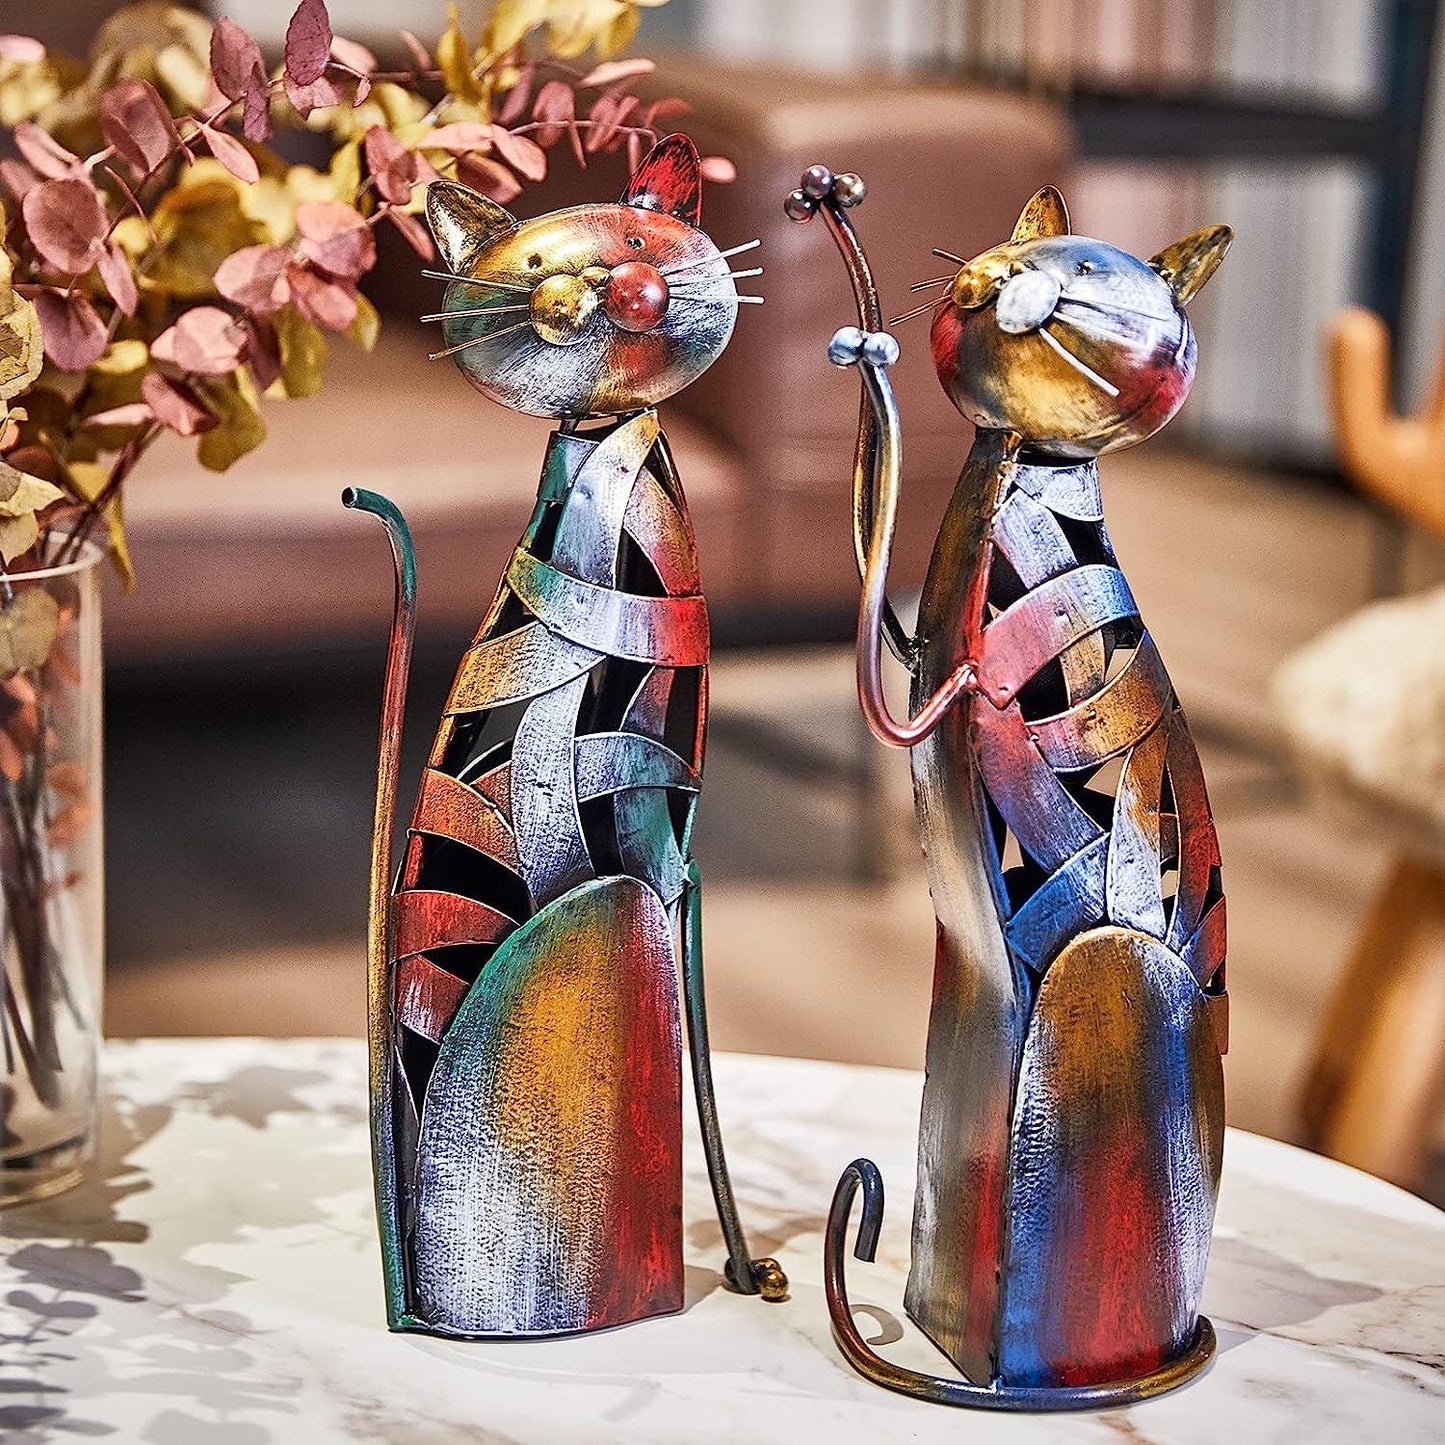 13.5 H Cat Statue - Metal Iron Cat Figurine Kitchen Décor Oil Painting Color Finish Sculpture Gift for Dining Room Living Room Kitchen Garden Patio Lawn (13.5 H Cat)